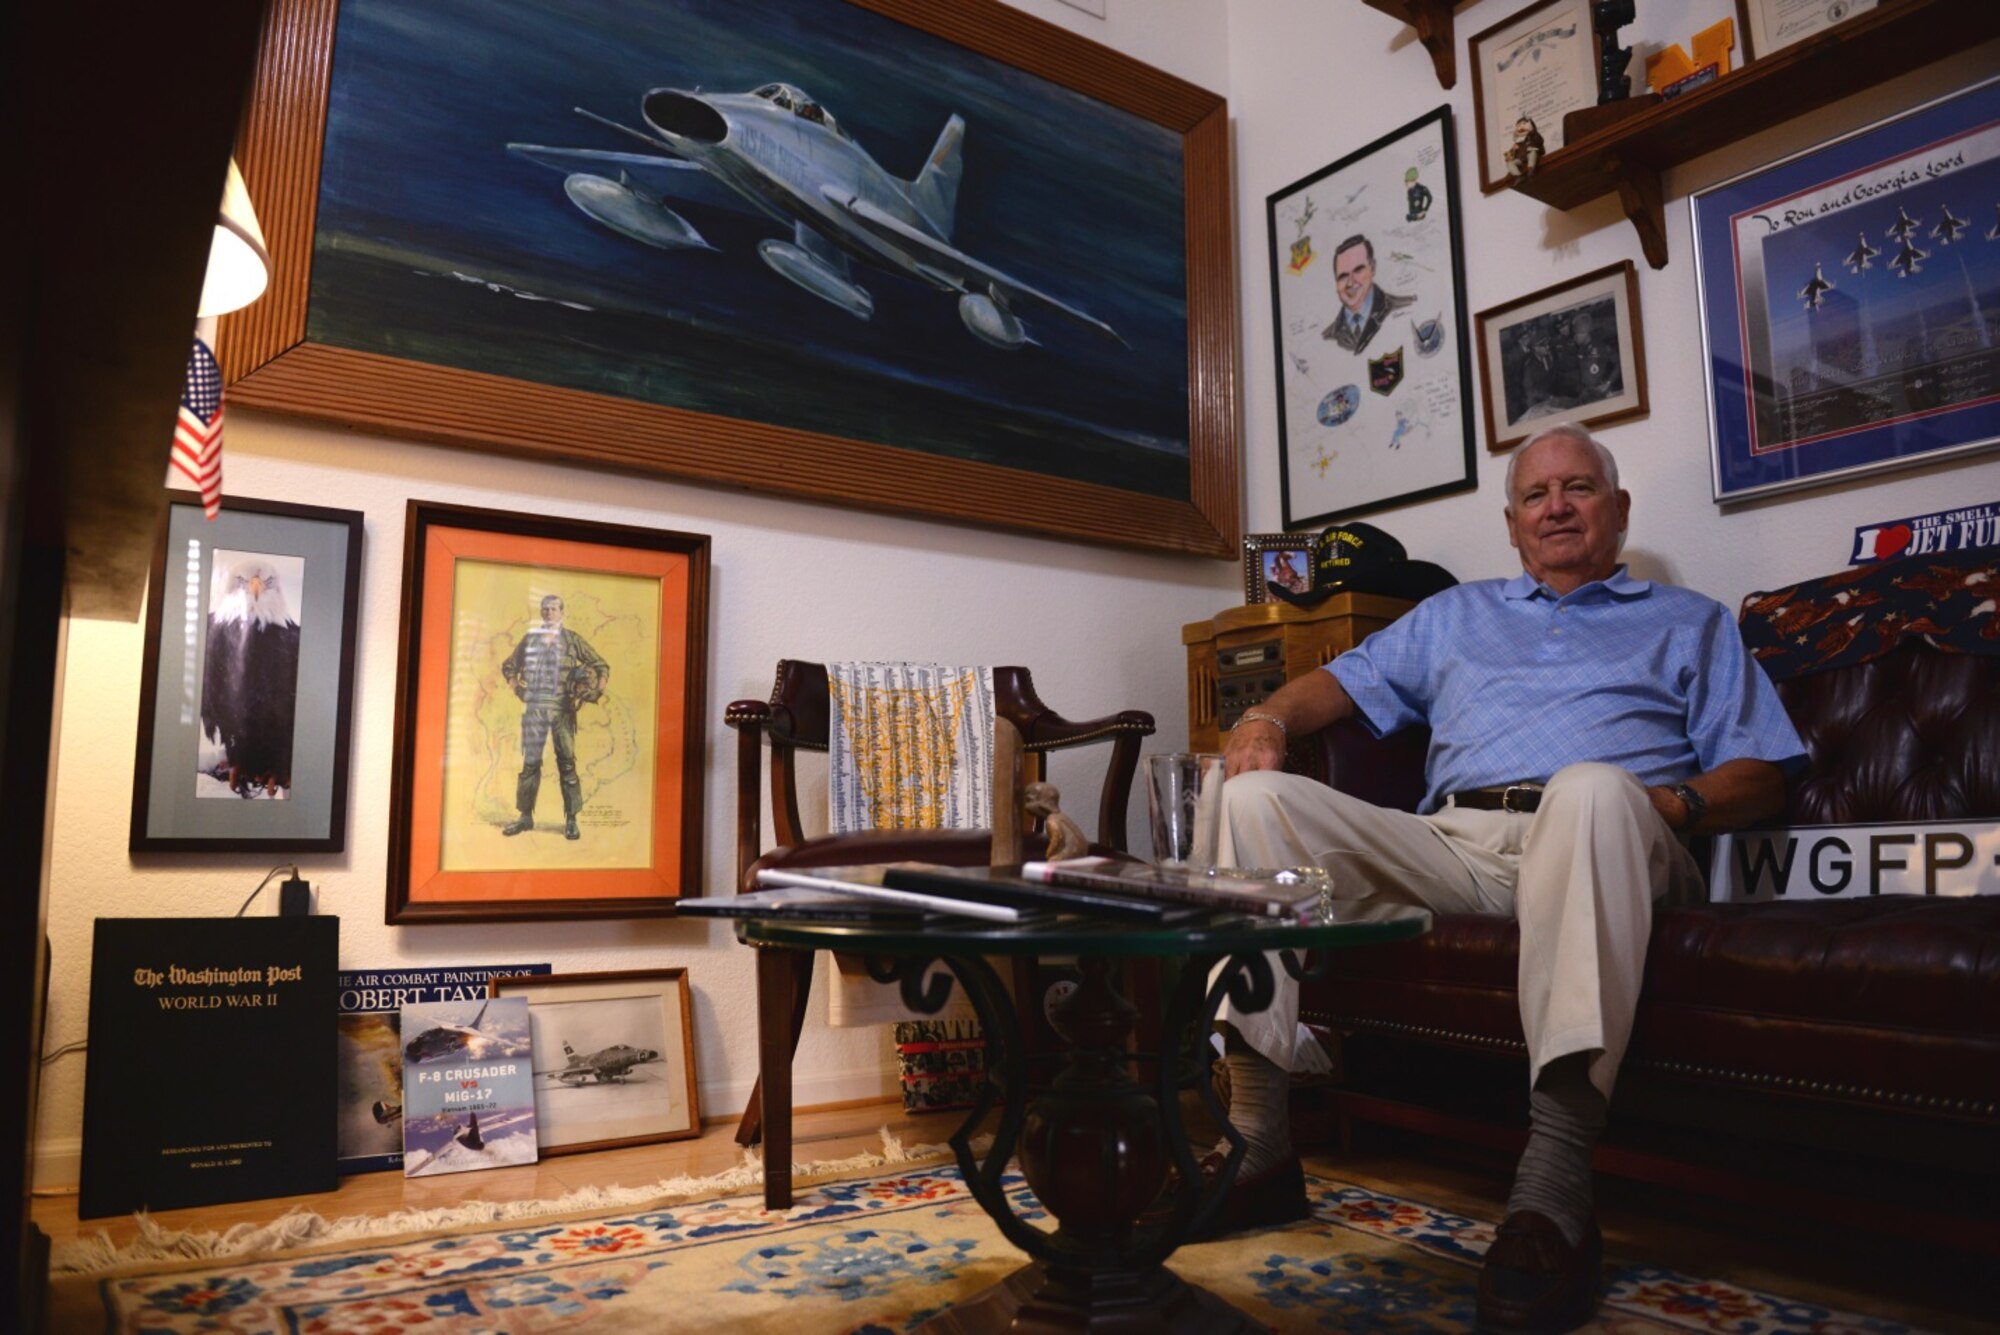 Retired Col. Ronald Lord, former Air Force fighter pilot, sits in a room in his home Oct. 26 where memorabilia of his flying career is displayed. During his Air Force career, Lord flew F-100s, F-8s, and F-4s.